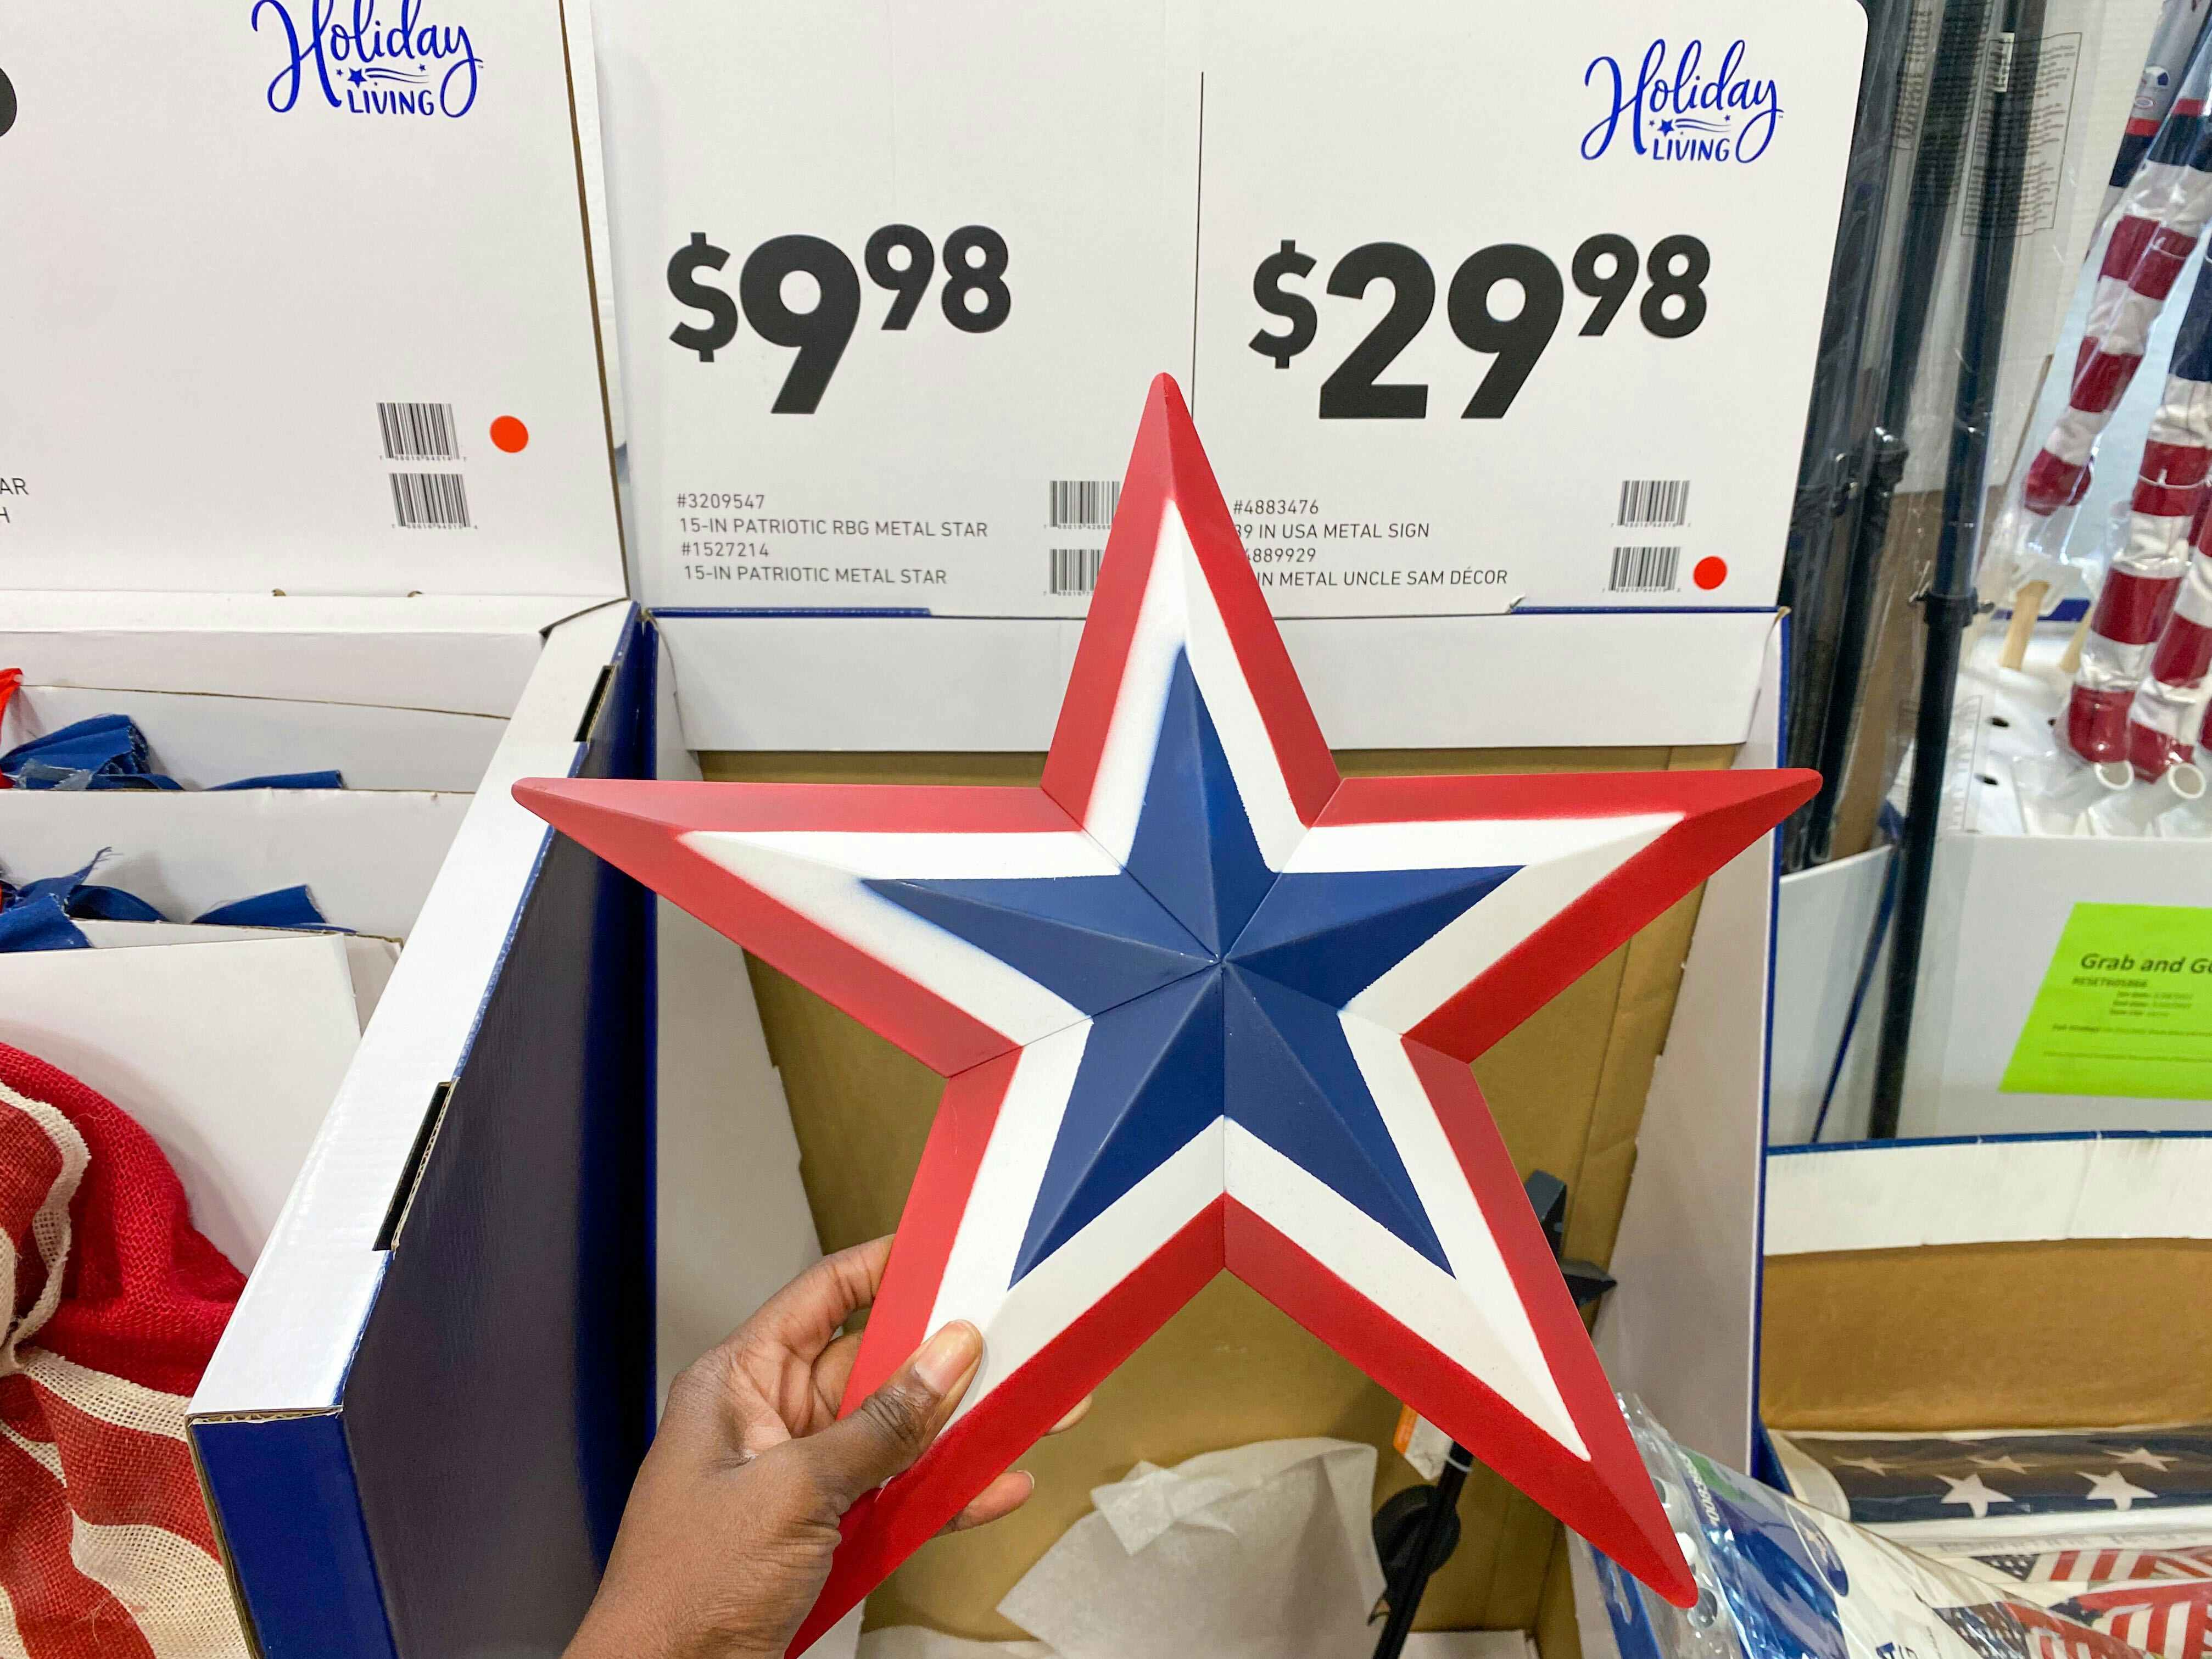 metal star decor at Lowe's in front of sale sign